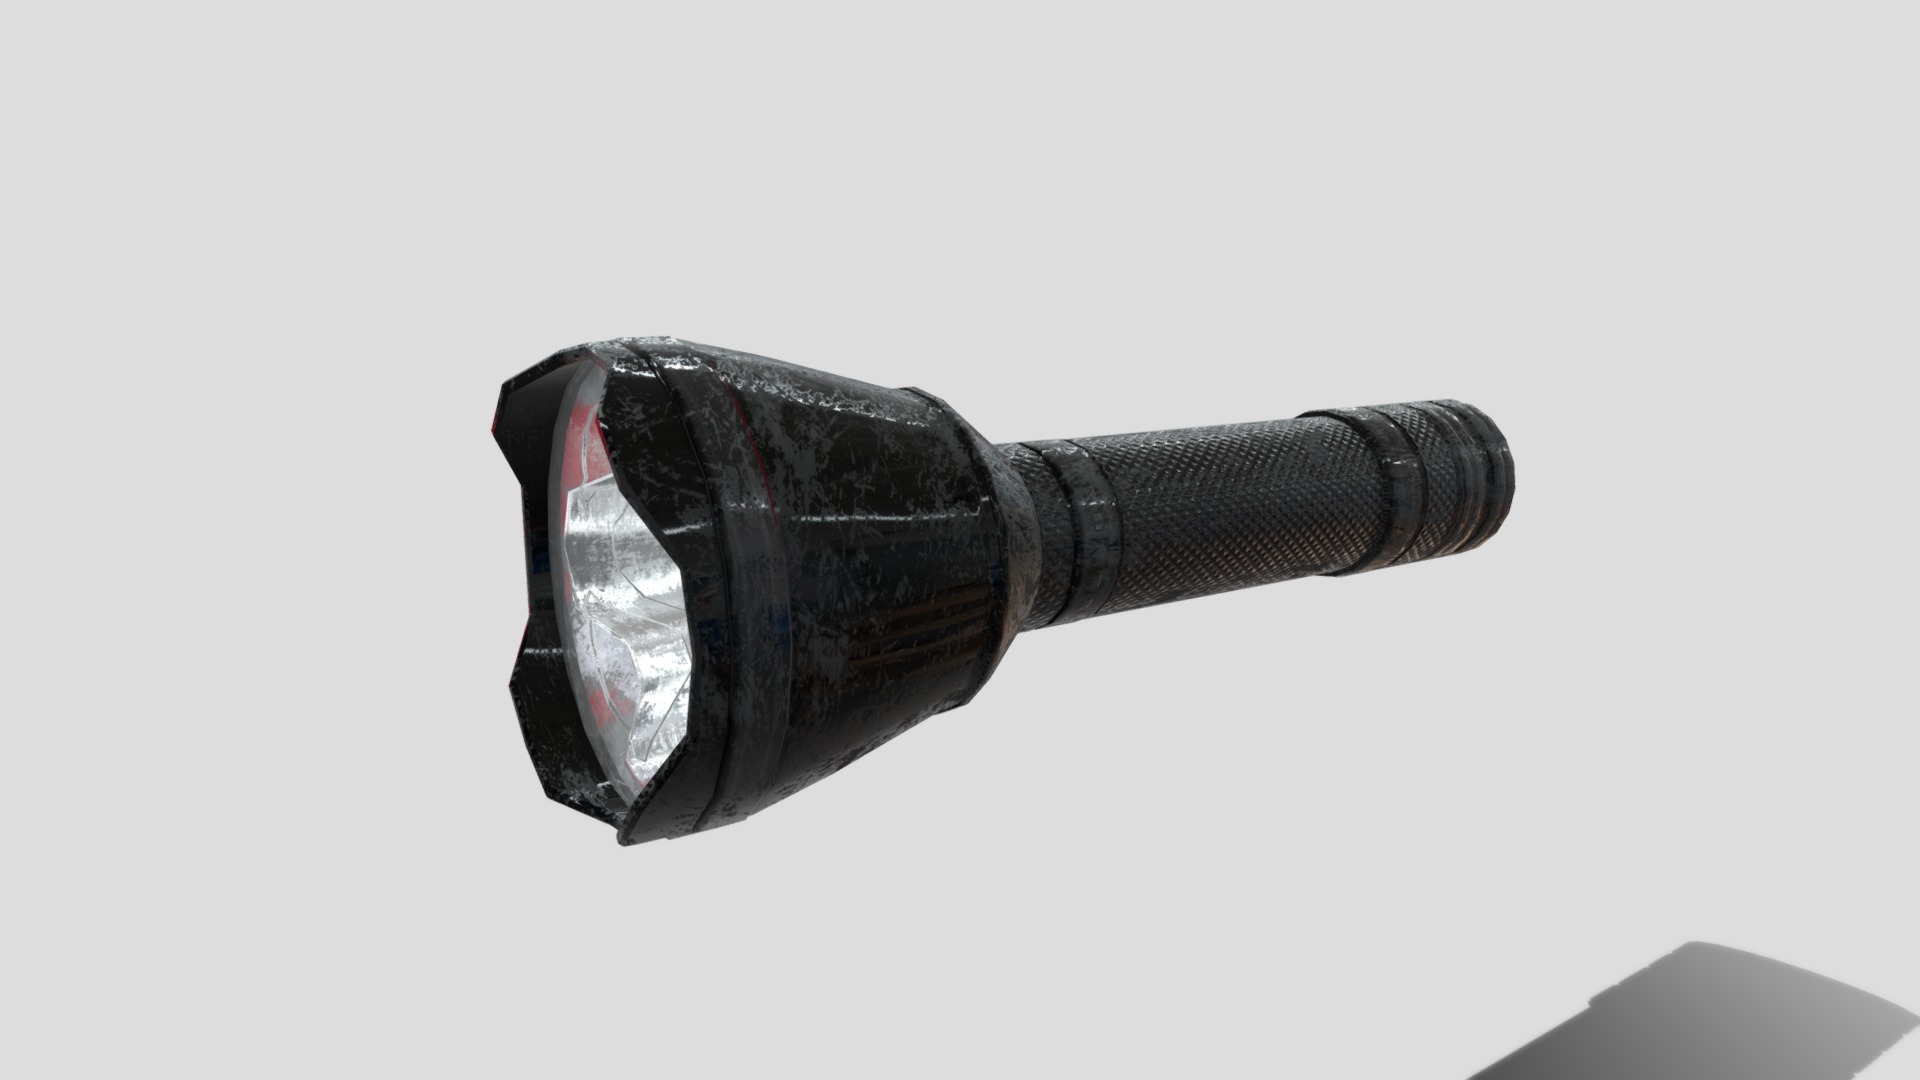 3D model Low Poly Dirty LED Flashlight - This is a 3D model of the Low Poly Dirty LED Flashlight. The 3D model is about a black cylindrical object.